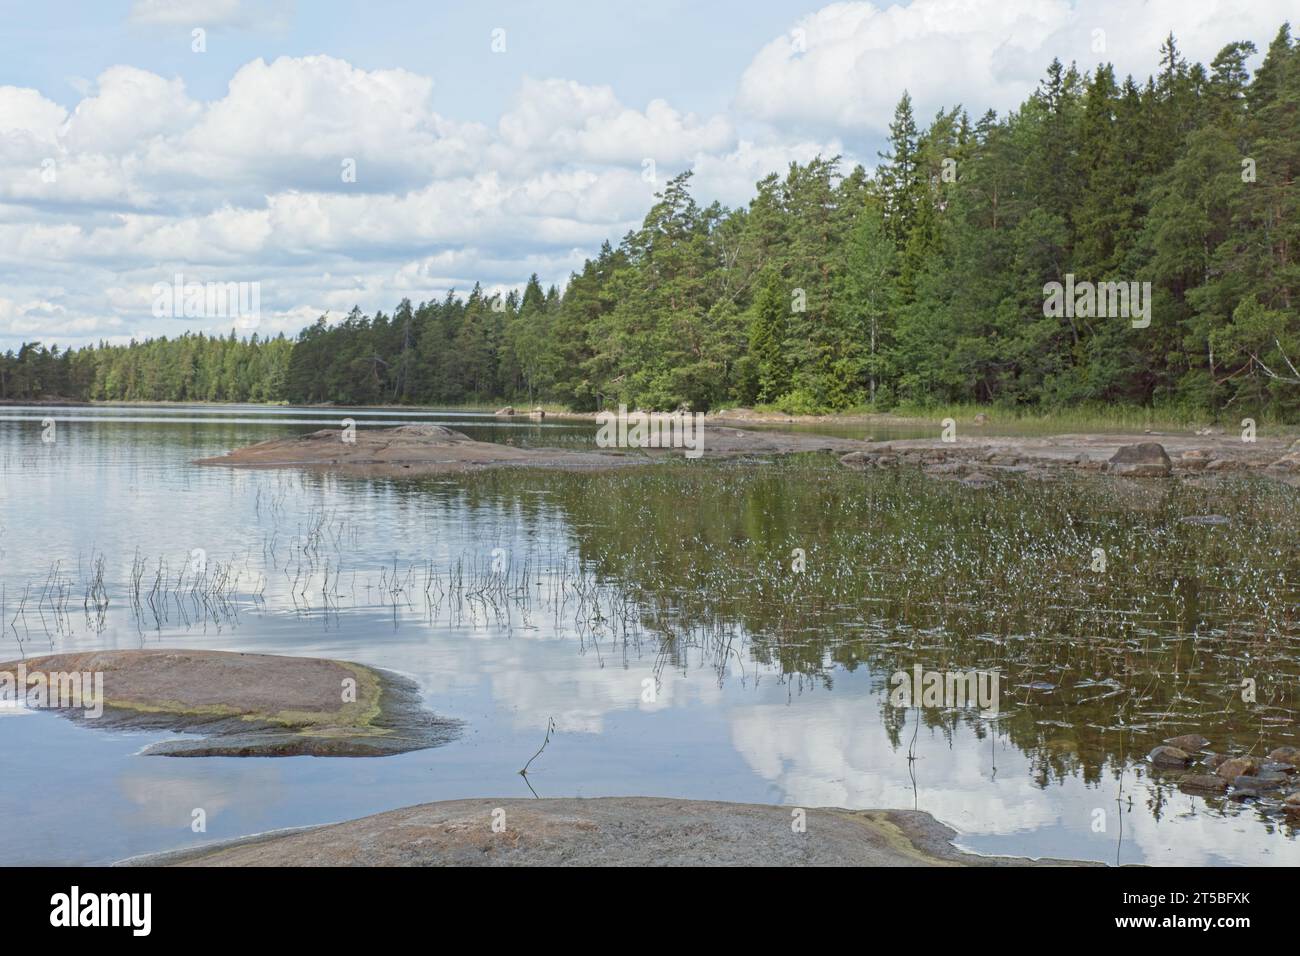 Landscape view of lake Meiko with shore forest reflecting on water surface, Meiko nature reserve, Kirkkonummi, Finland. Stock Photo